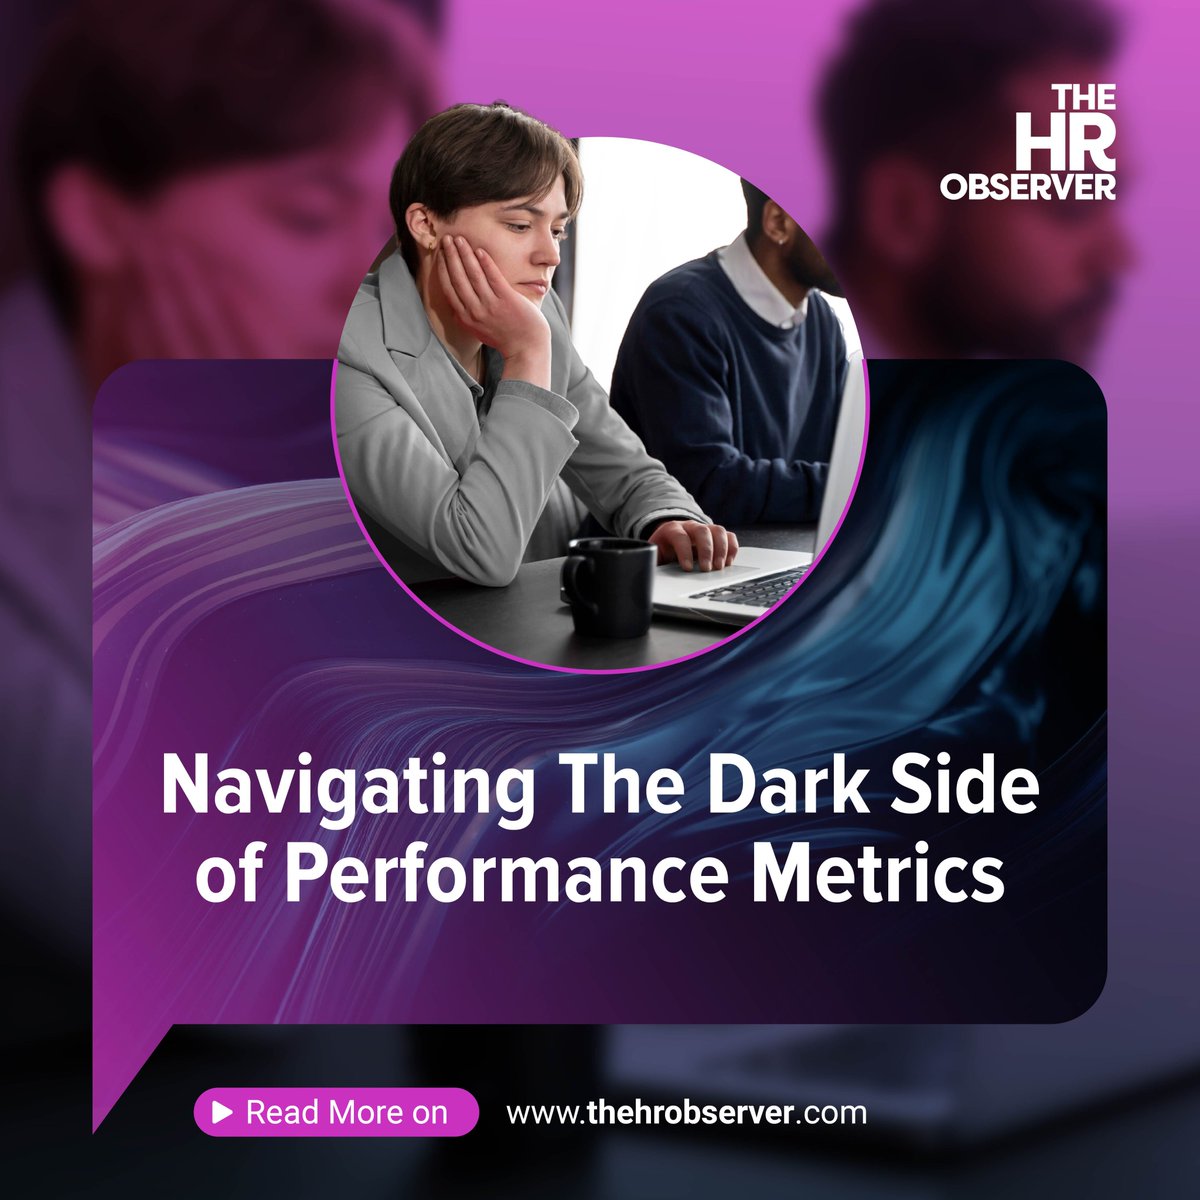 Performance metrics is vital for accountability, but beware of their pitfalls. Sacrificing quality for speed or fostering fear are real risks. Find out how to calibrate our focus, prioritising values and growth over mere numbers at: bit.ly/3QDhxya